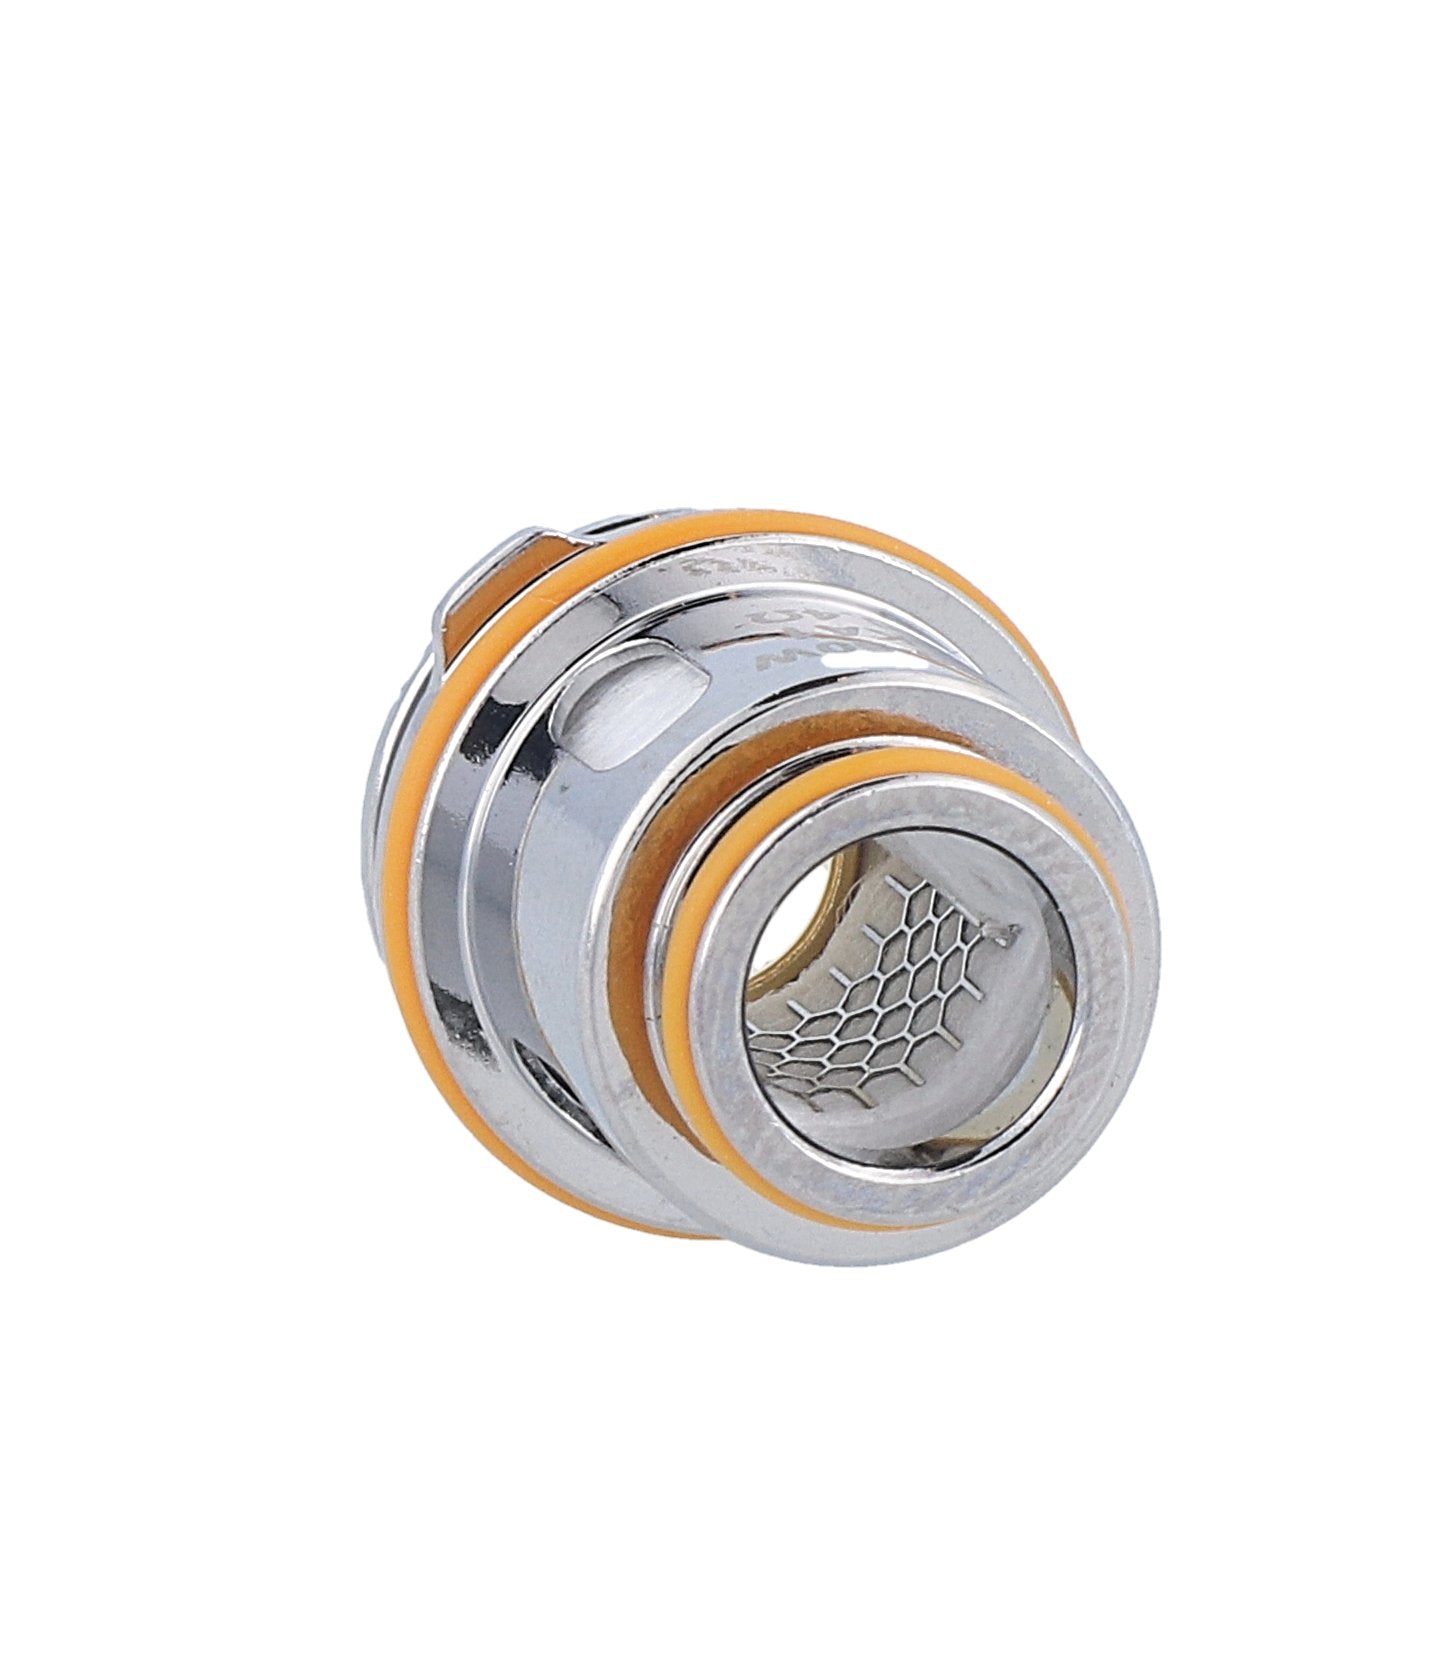 GeekVape - Z Series - Heads 0,4 Ohm (5 Stück pro Packung) - 1er Packung 0,4 Ohm - Vapes4you